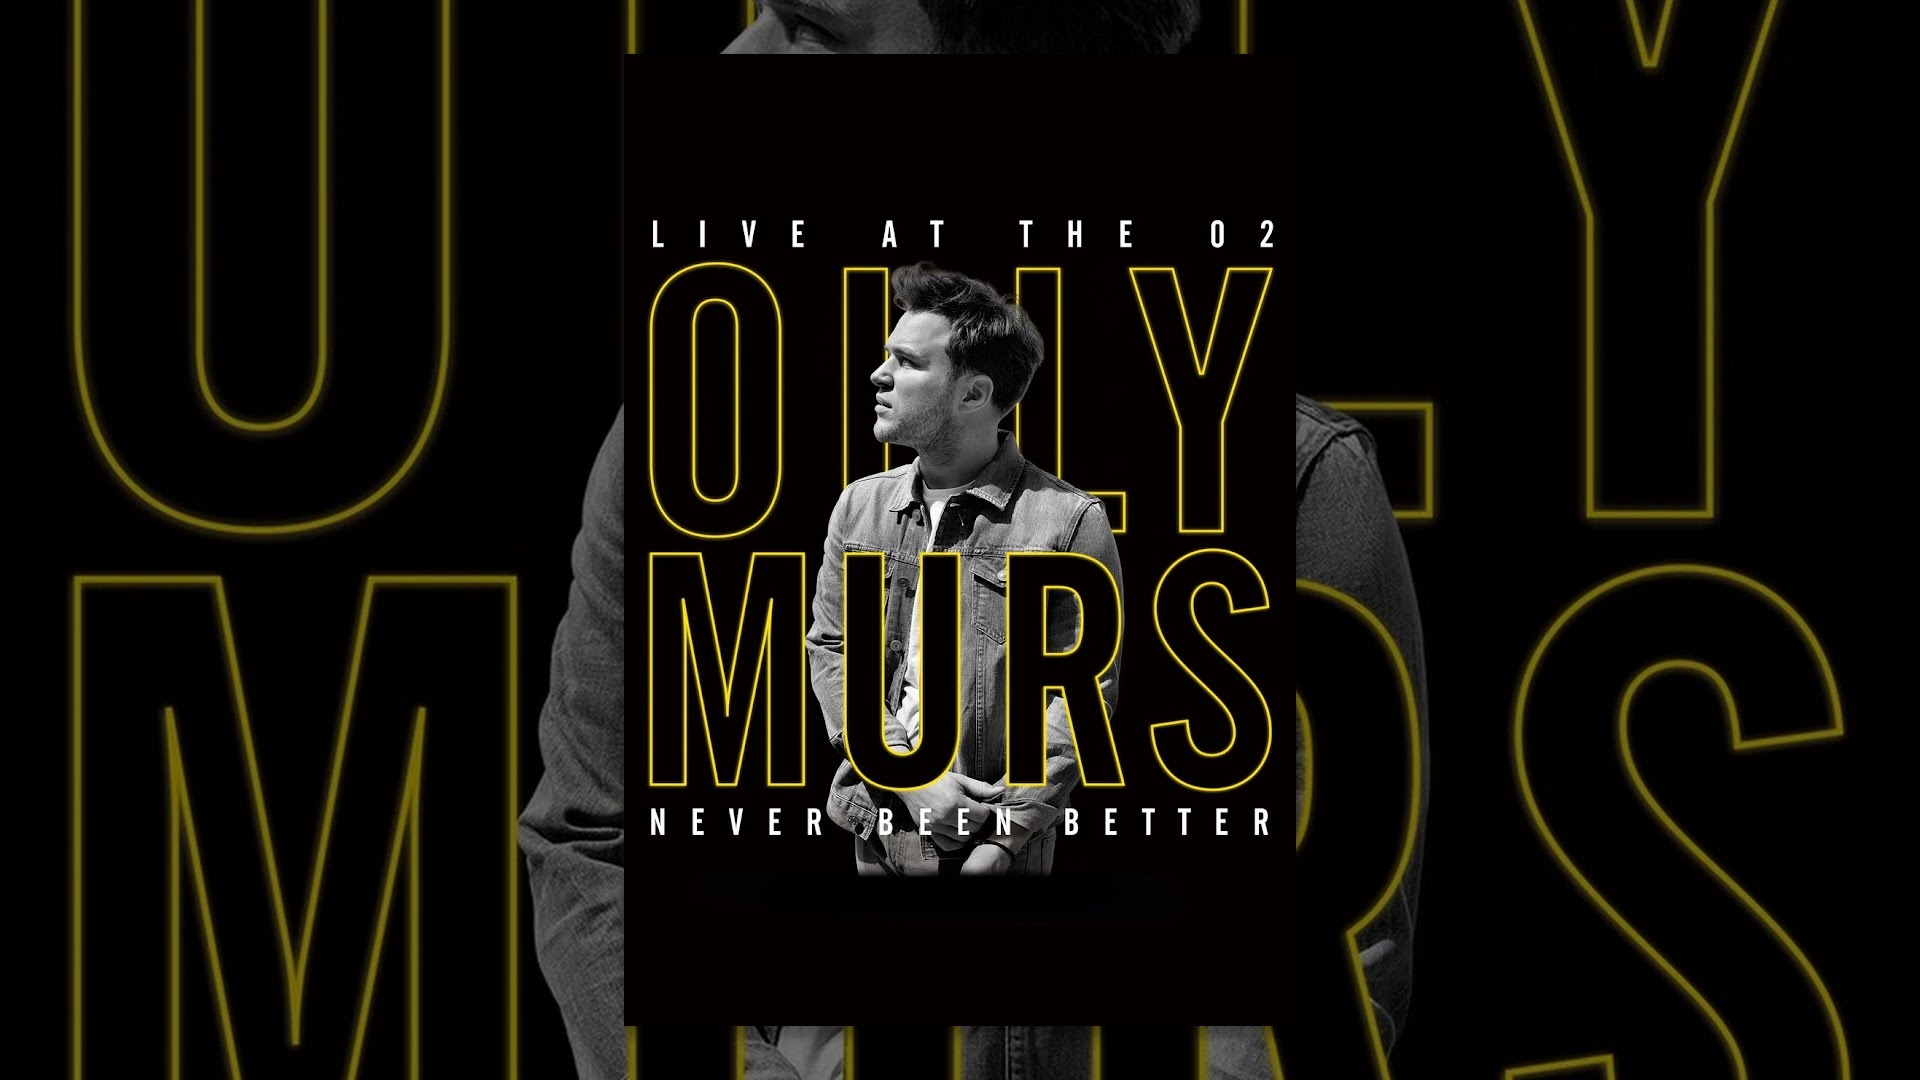 Olly Murs: Live at the O2